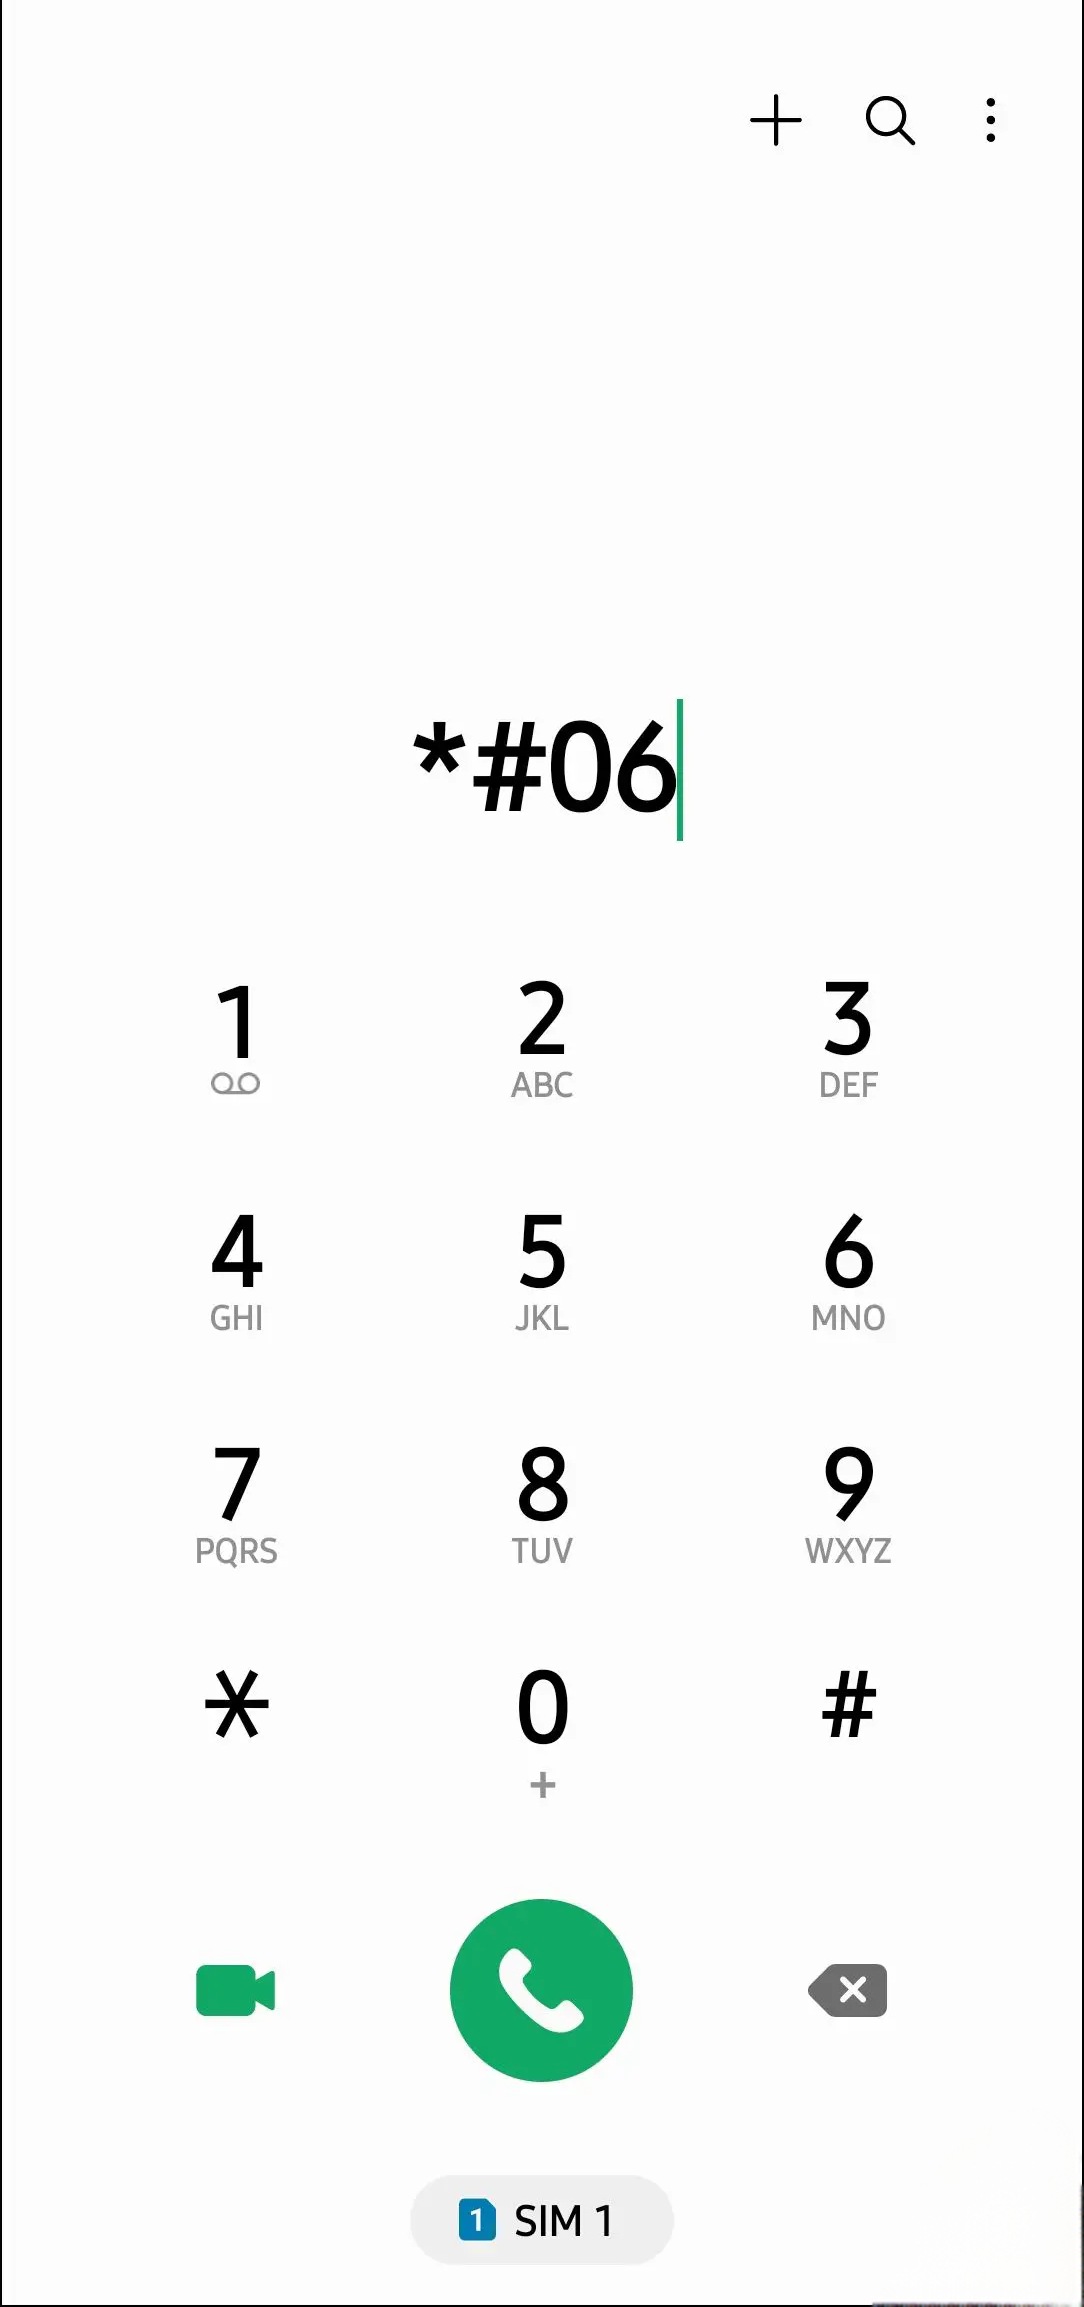 Match the IMEI Number